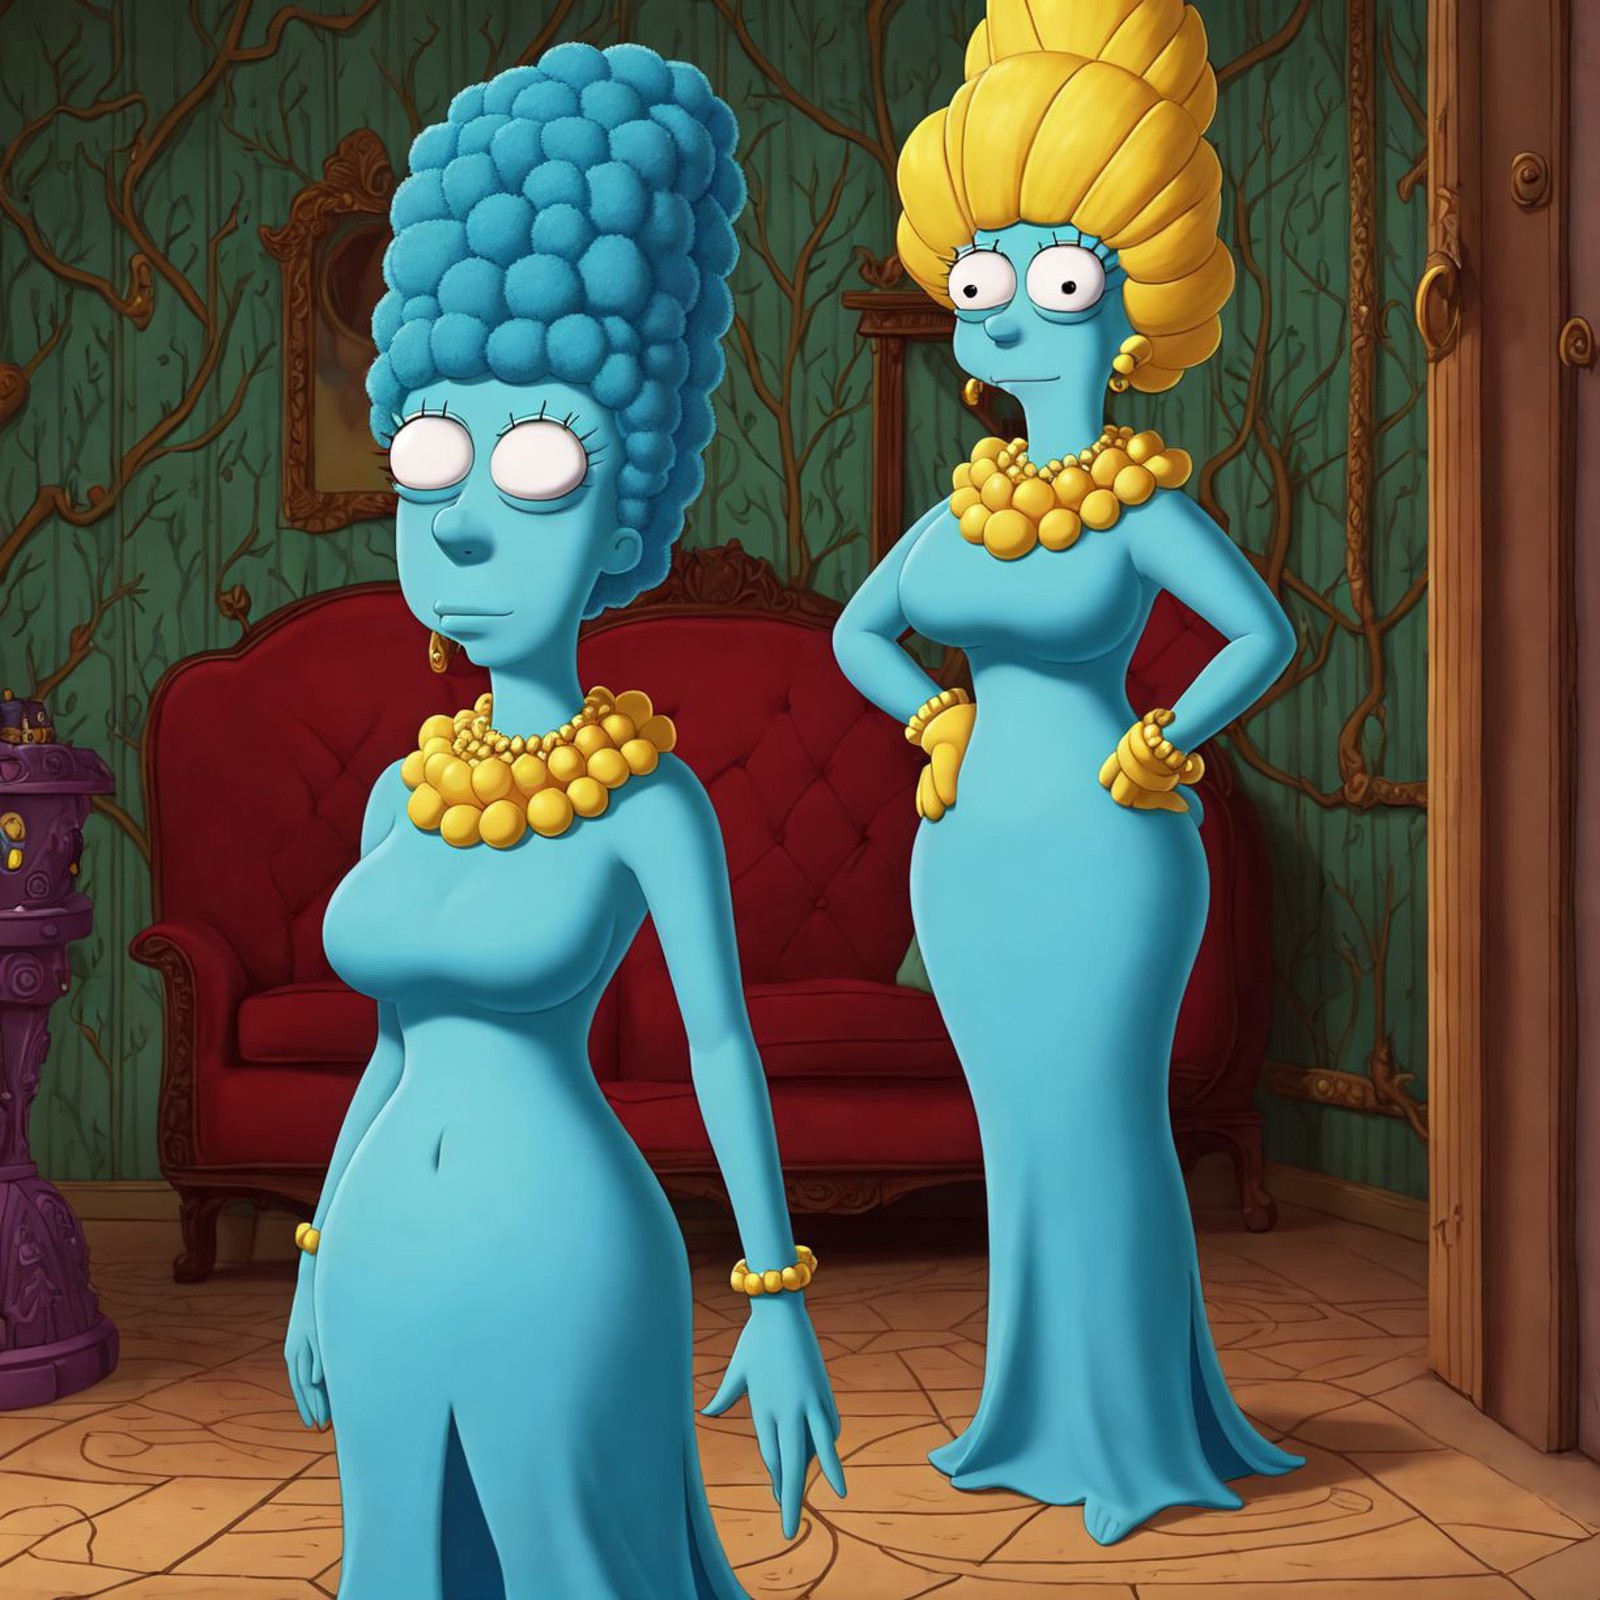 00039-20230531093432-556-The exotic life of Marge Simpson as a sexy character, Very detailed, clean, high quality, sharp image, based on H.P Lovecraft st.jpg